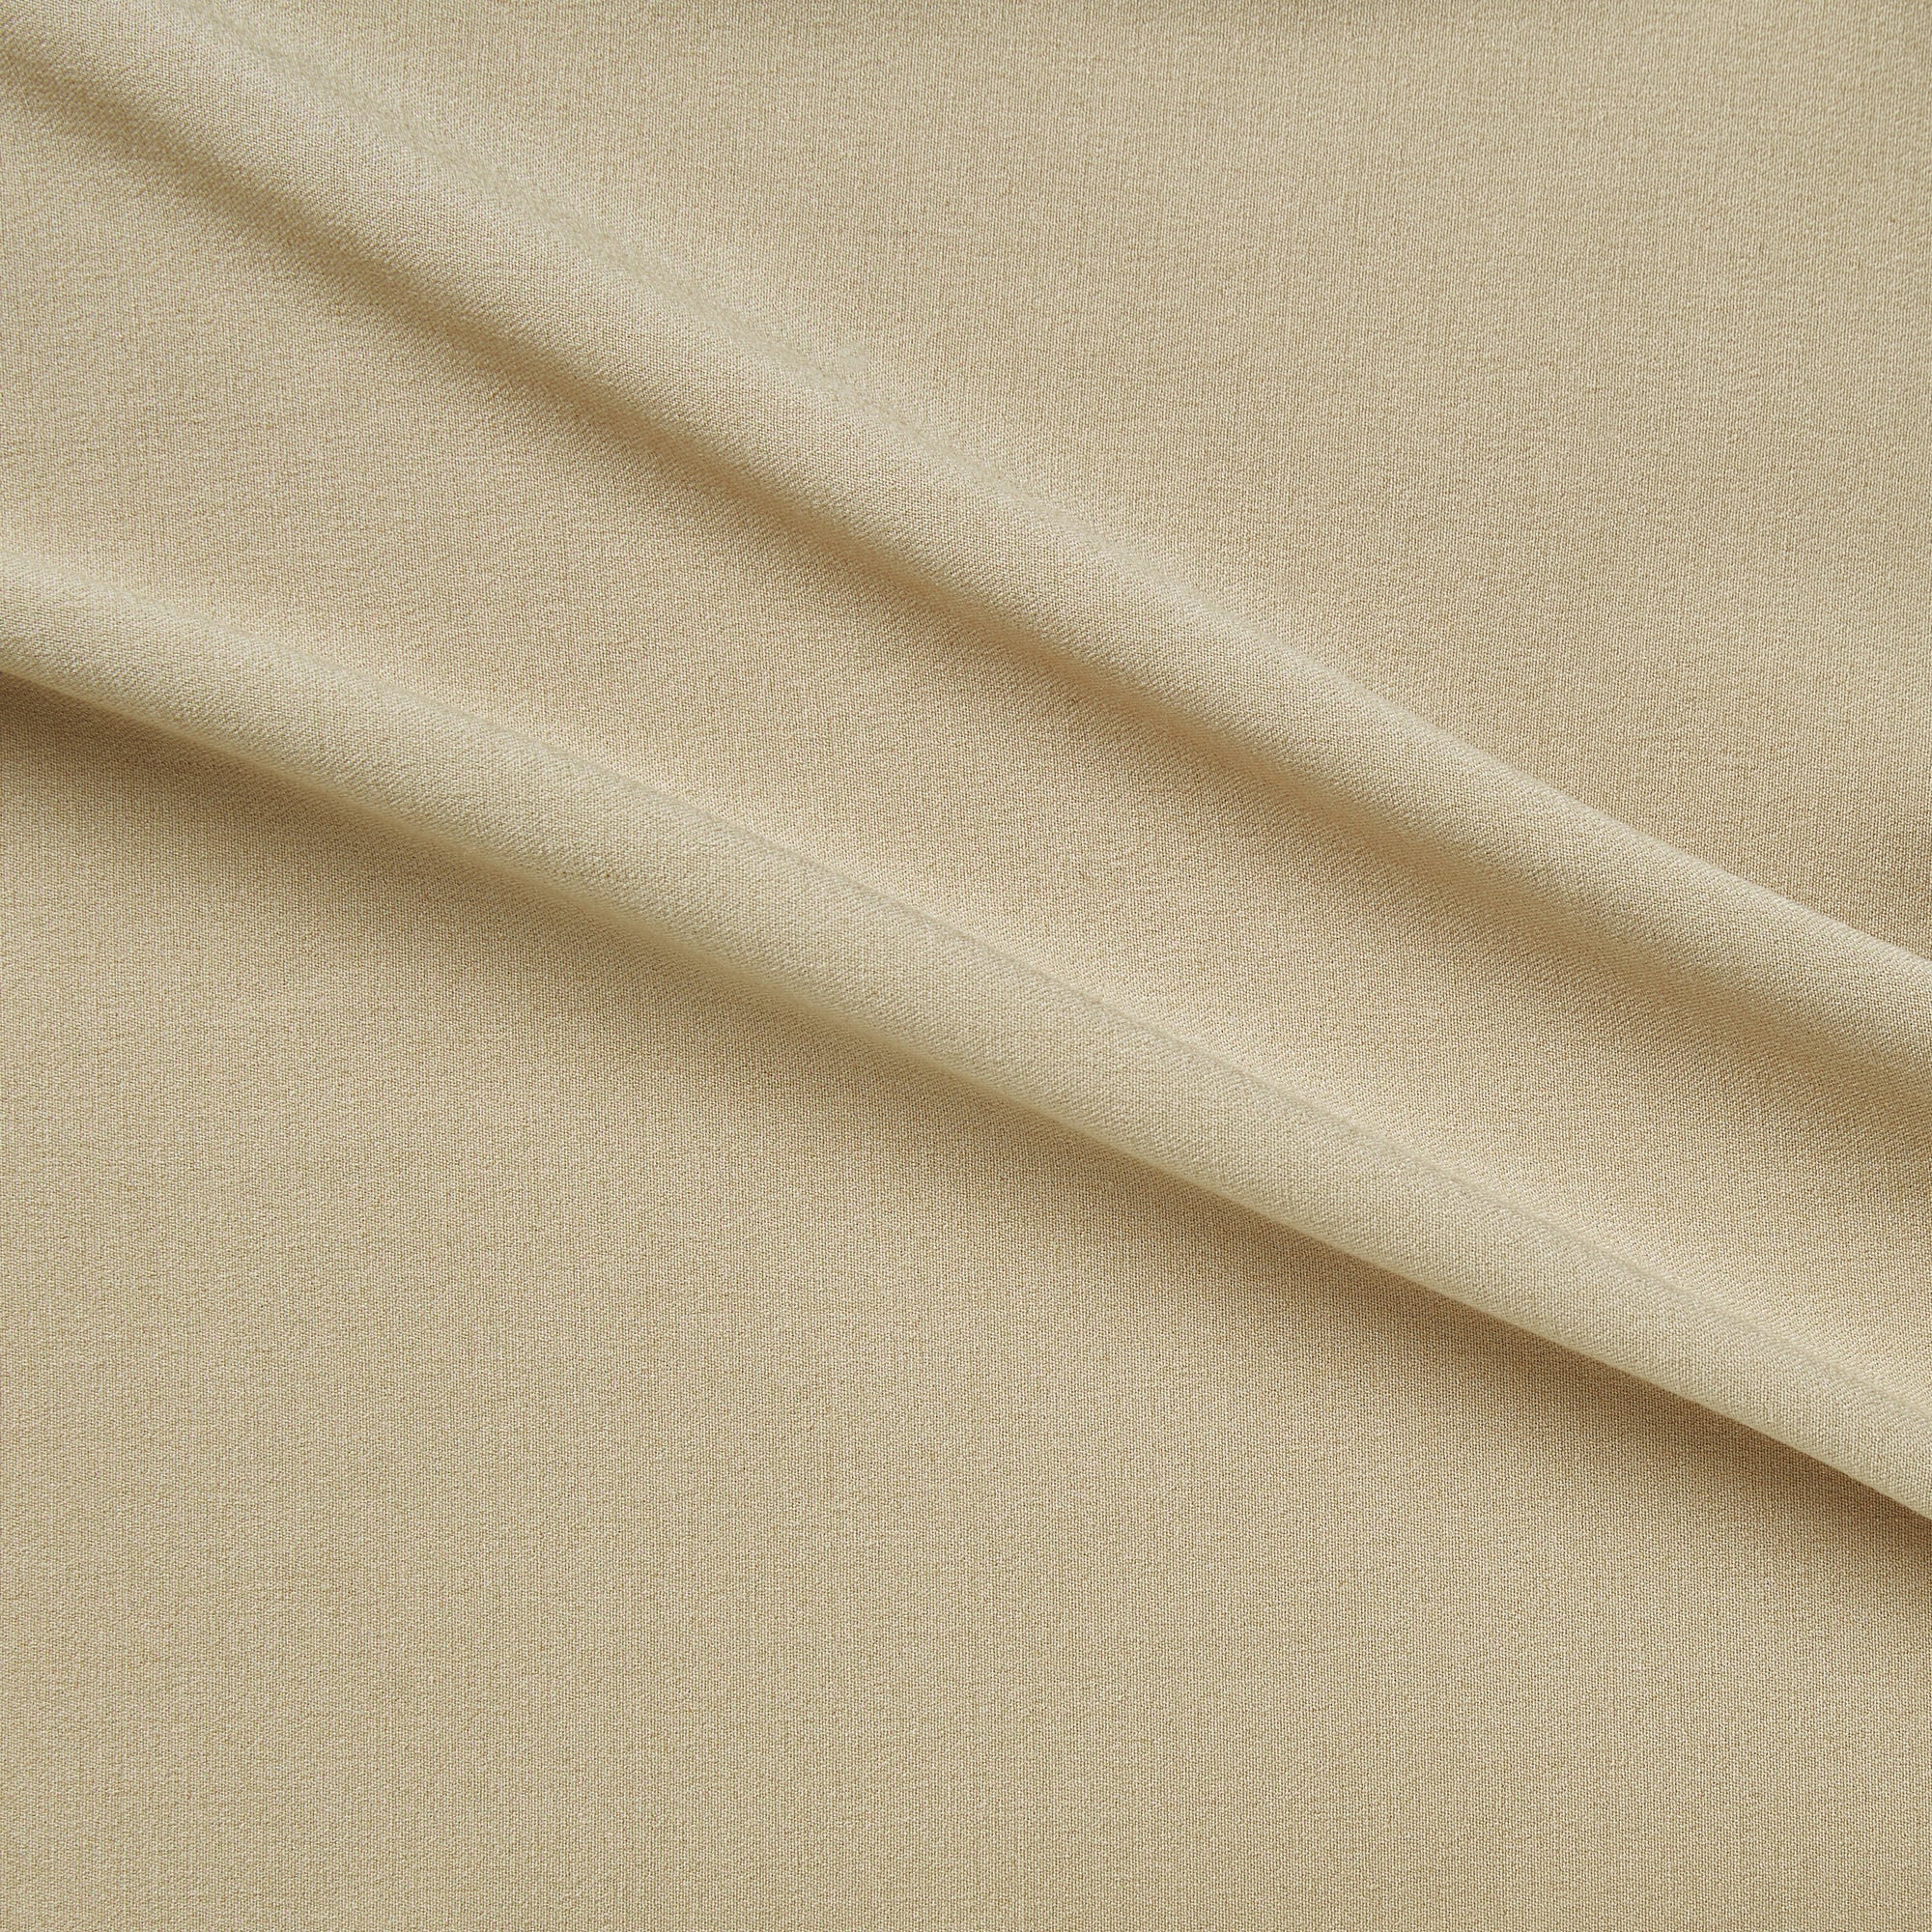 Presenting encore a stone colored plain woven stretch bottom weight polyester and rayon blend with spandex